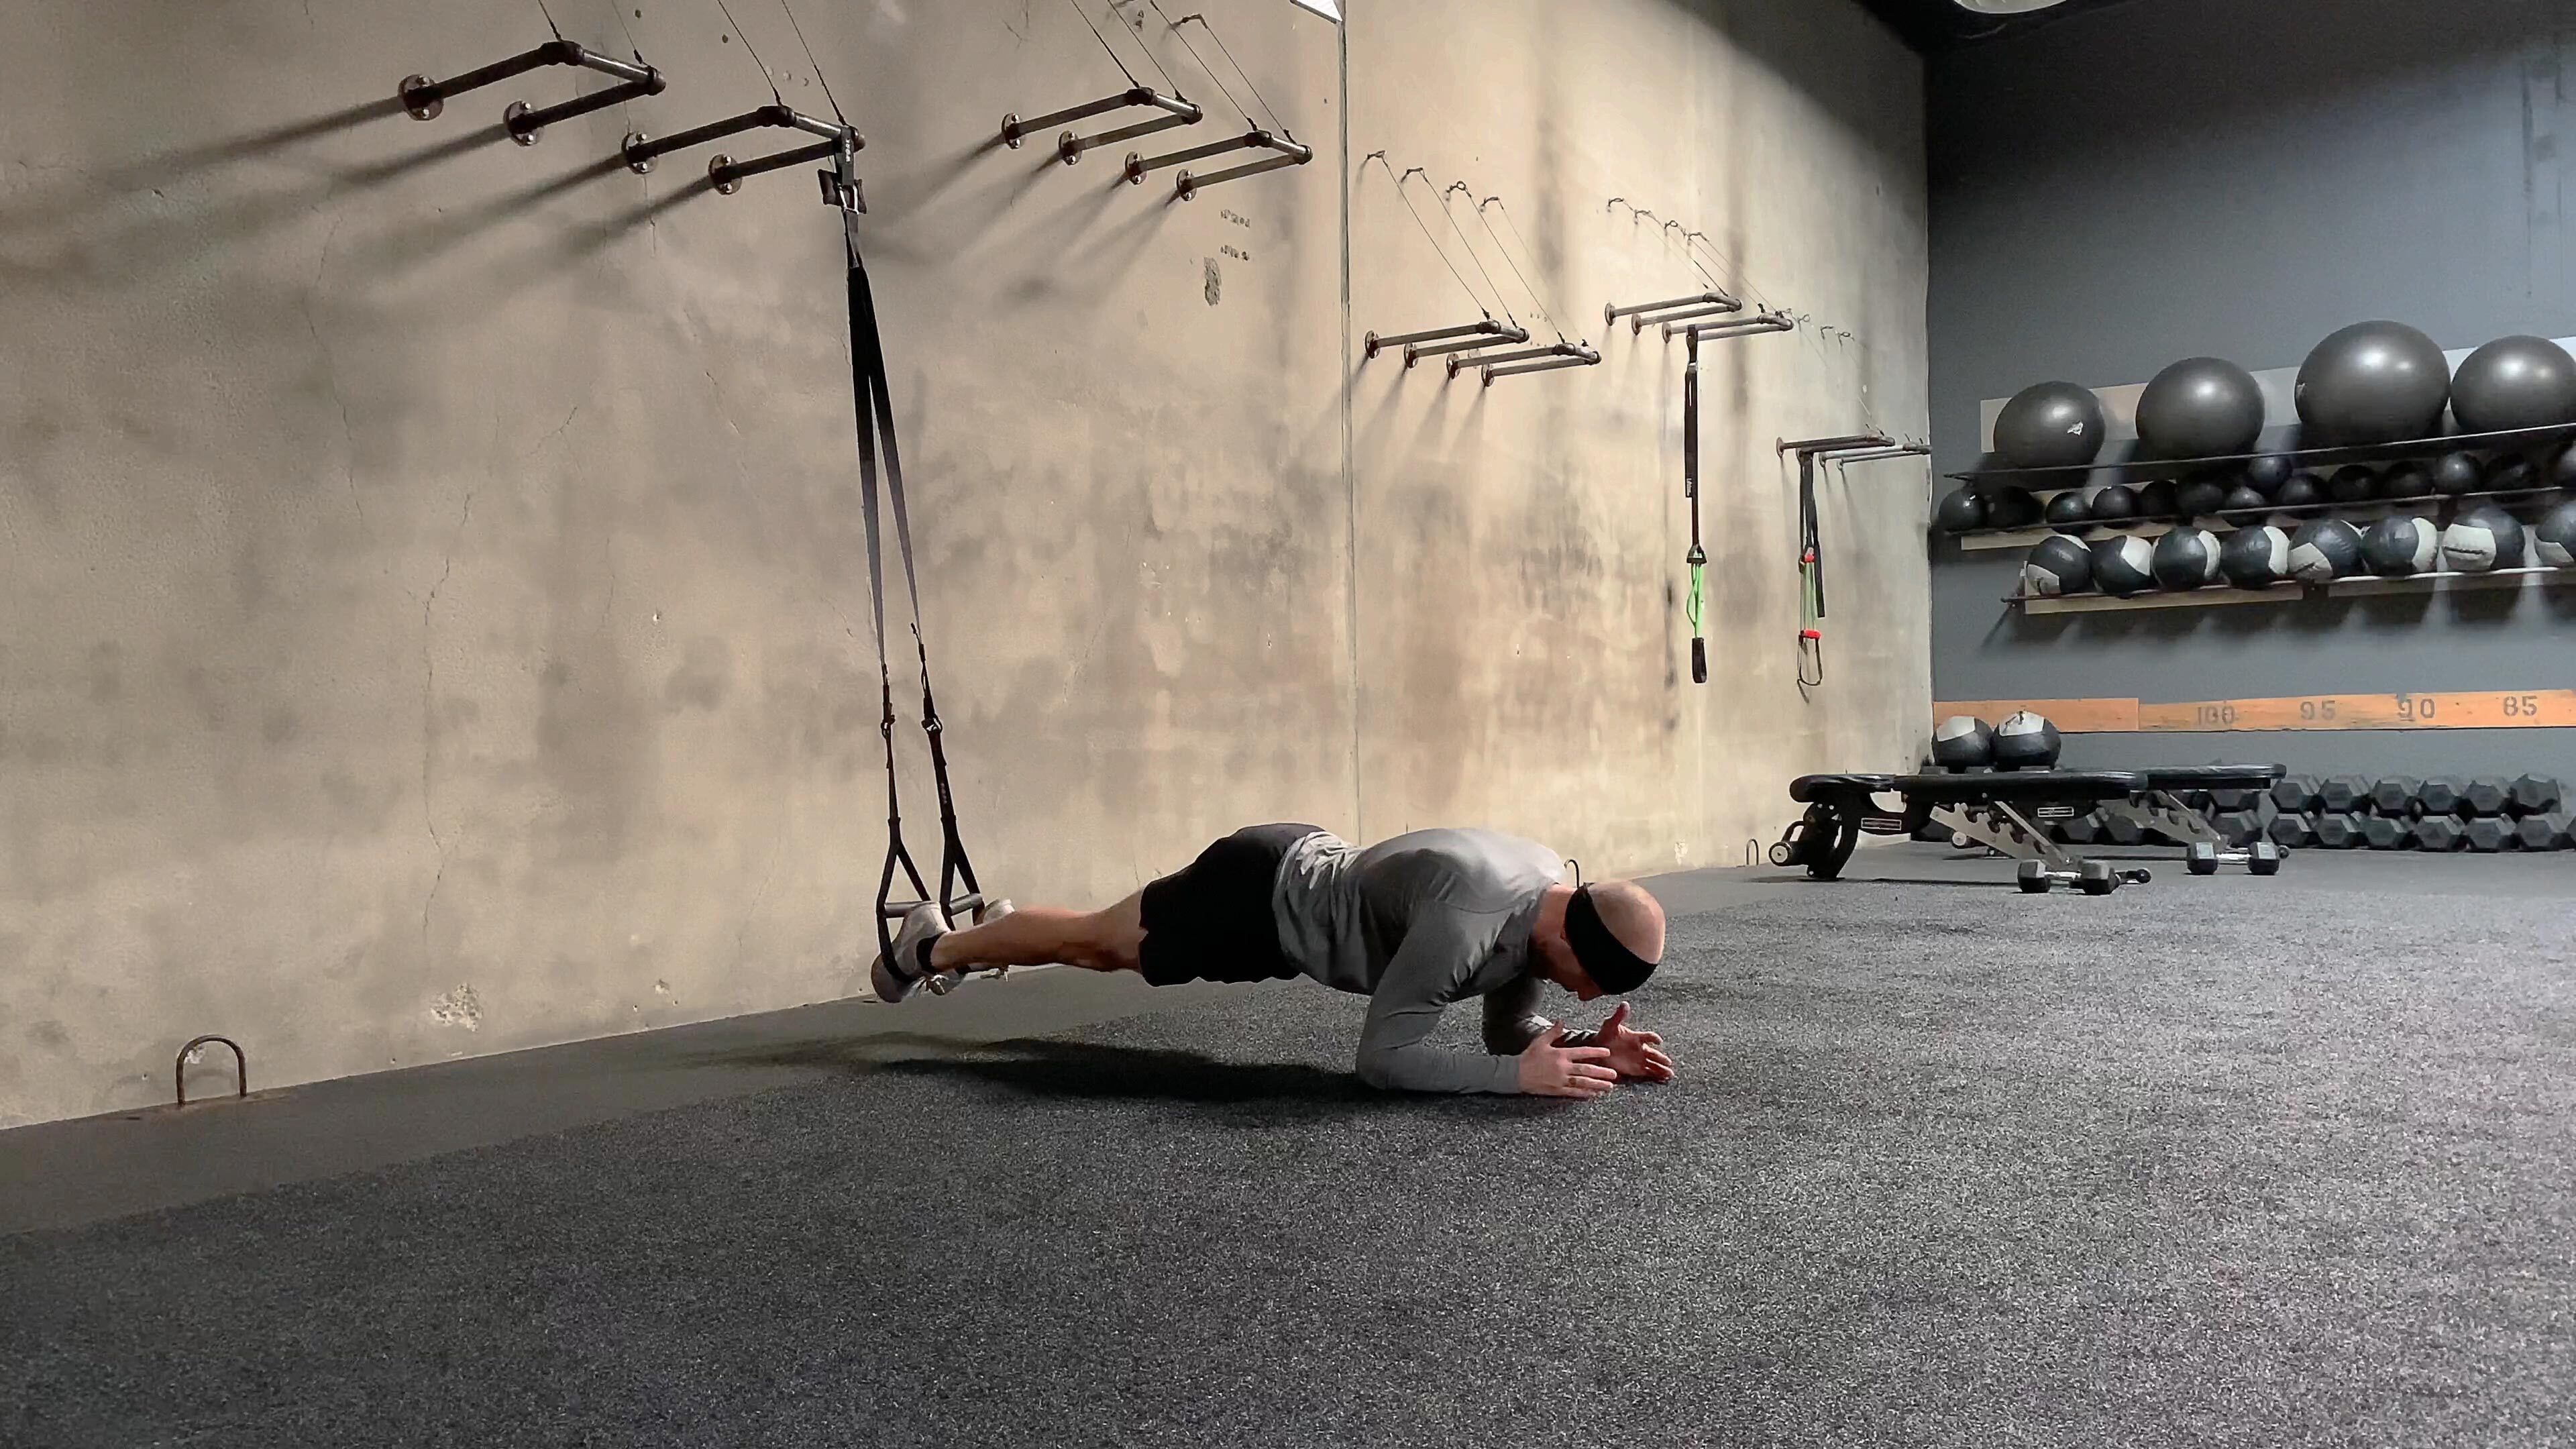 TRX Suspension Trainer Review: The workout straps are my home-gym